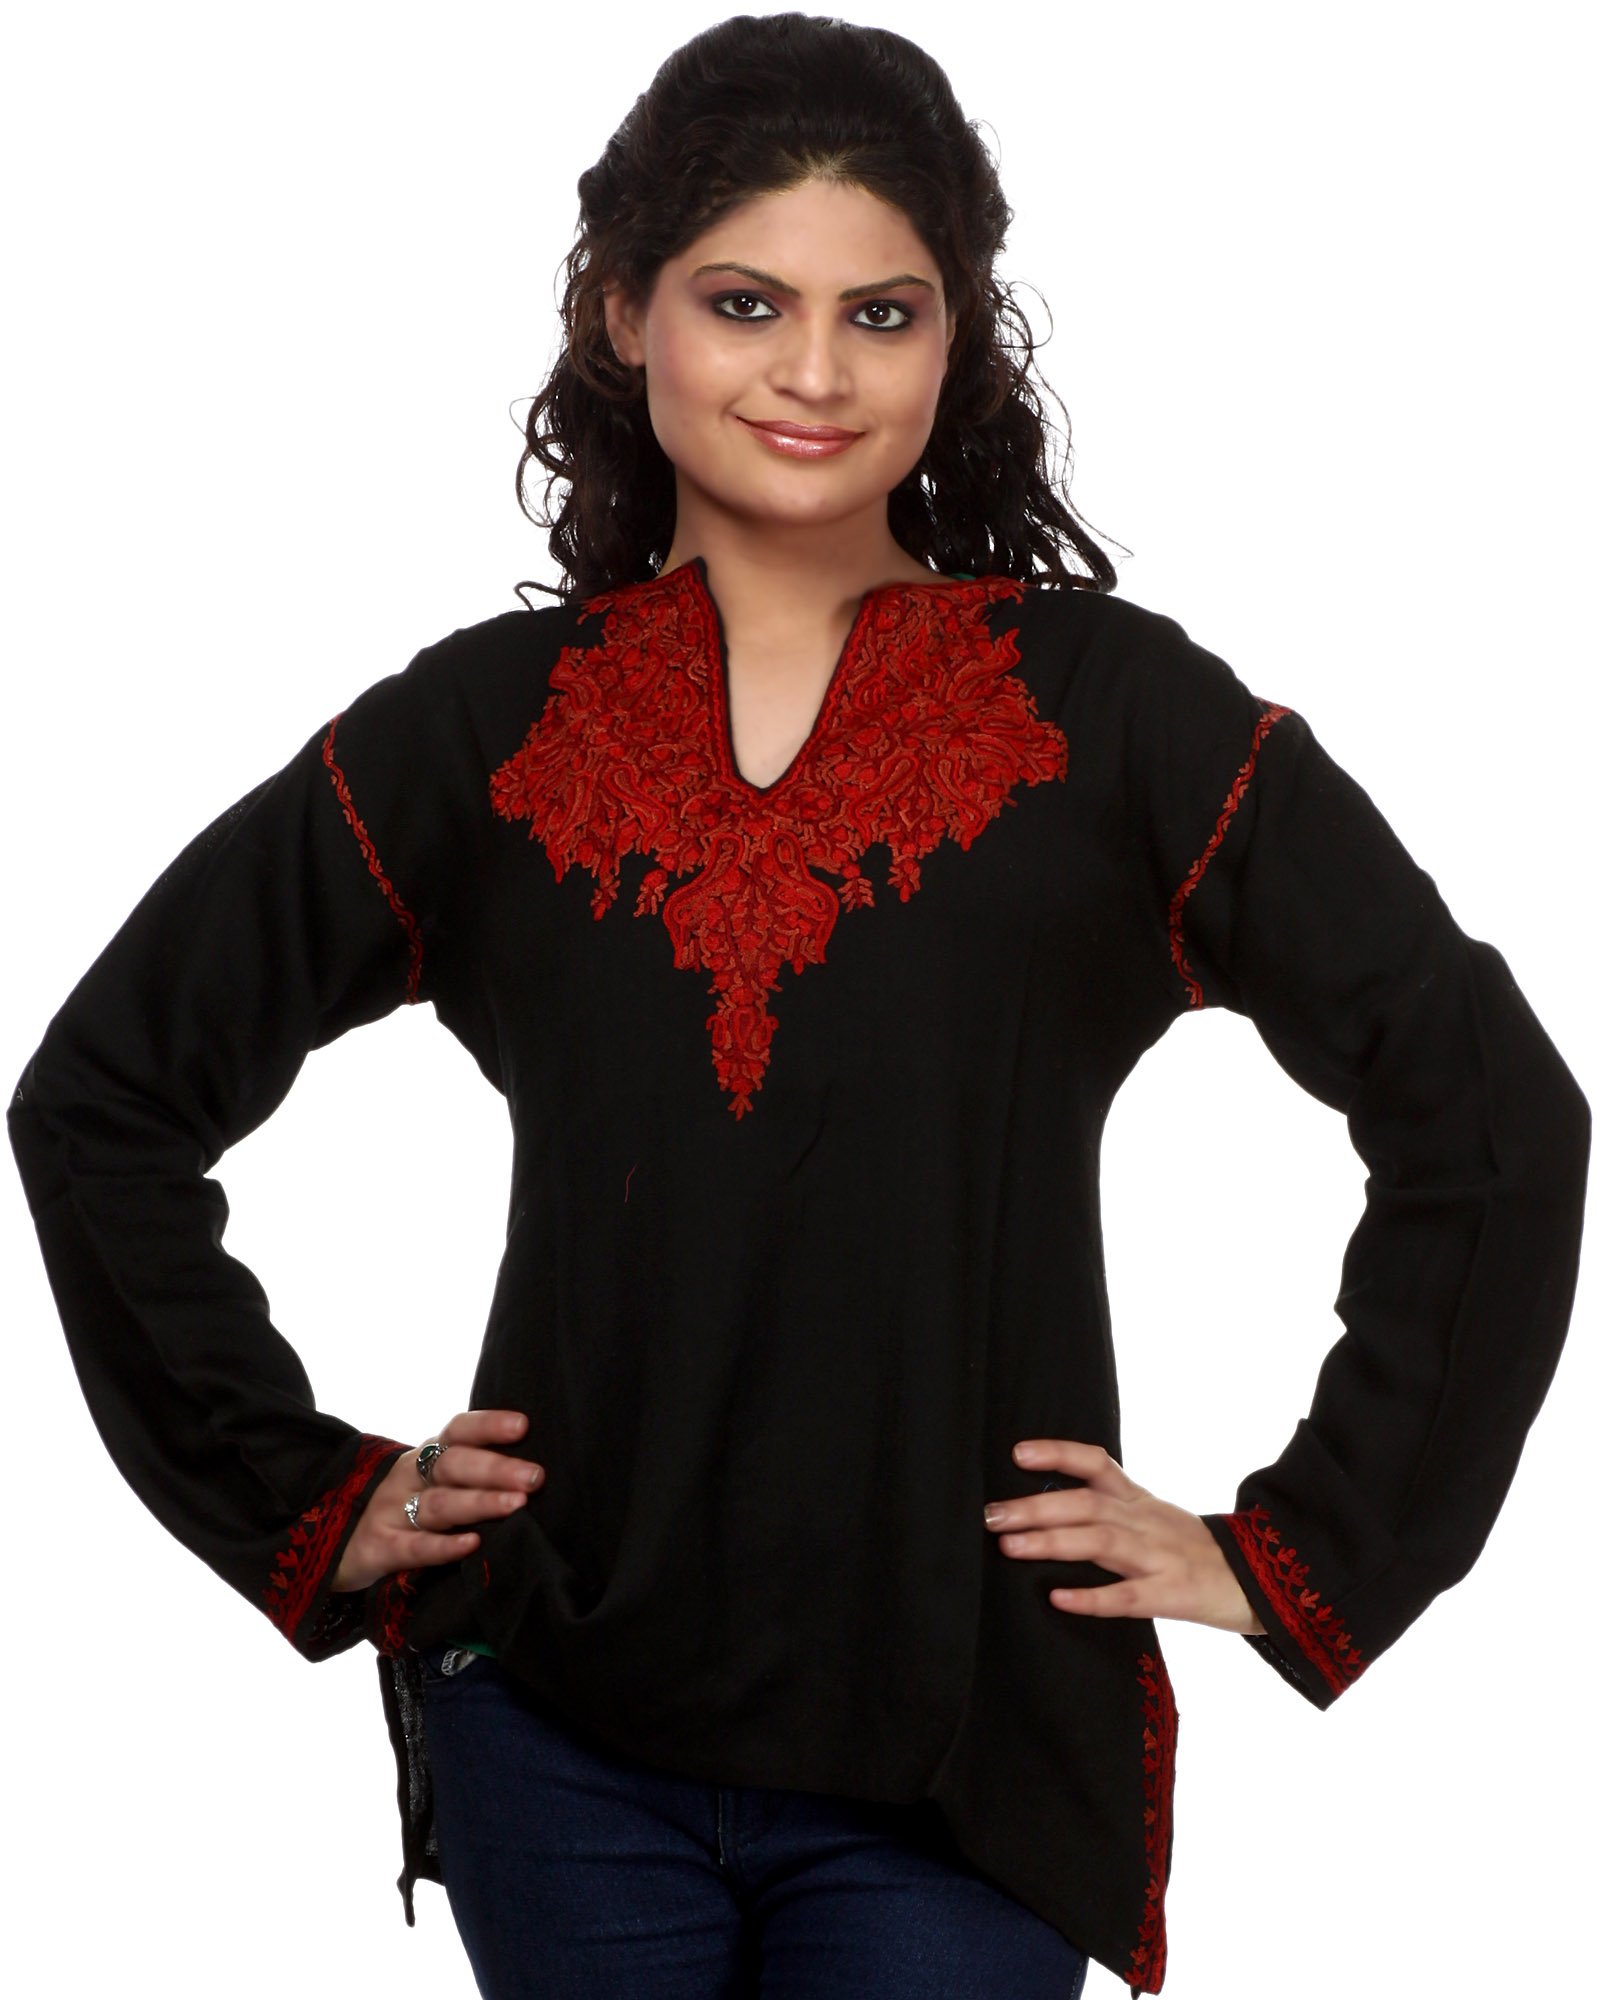 Plain Black Kurti From Kashmir with Hand Embroidered Paisleys in Red ...